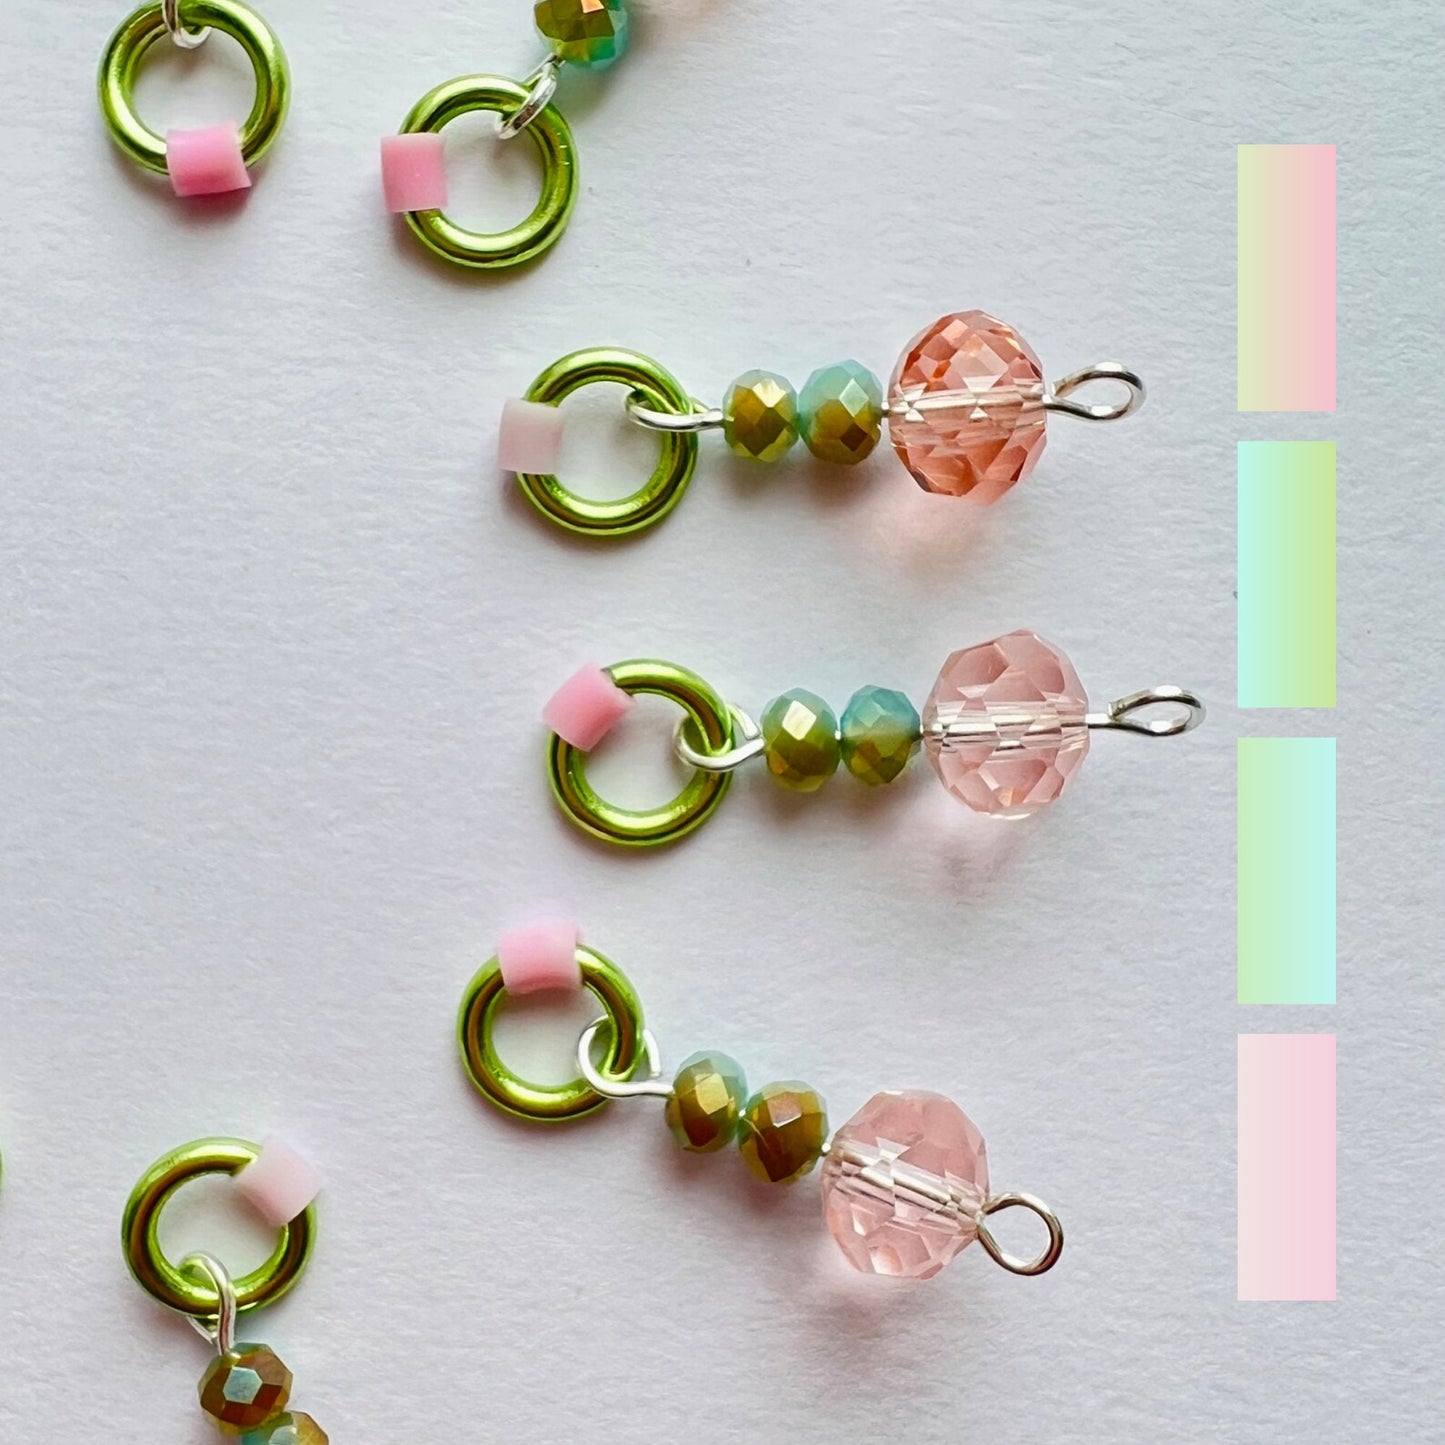 Blossom Pink Crystal Knitting Notions with Aqua and Gold Accents